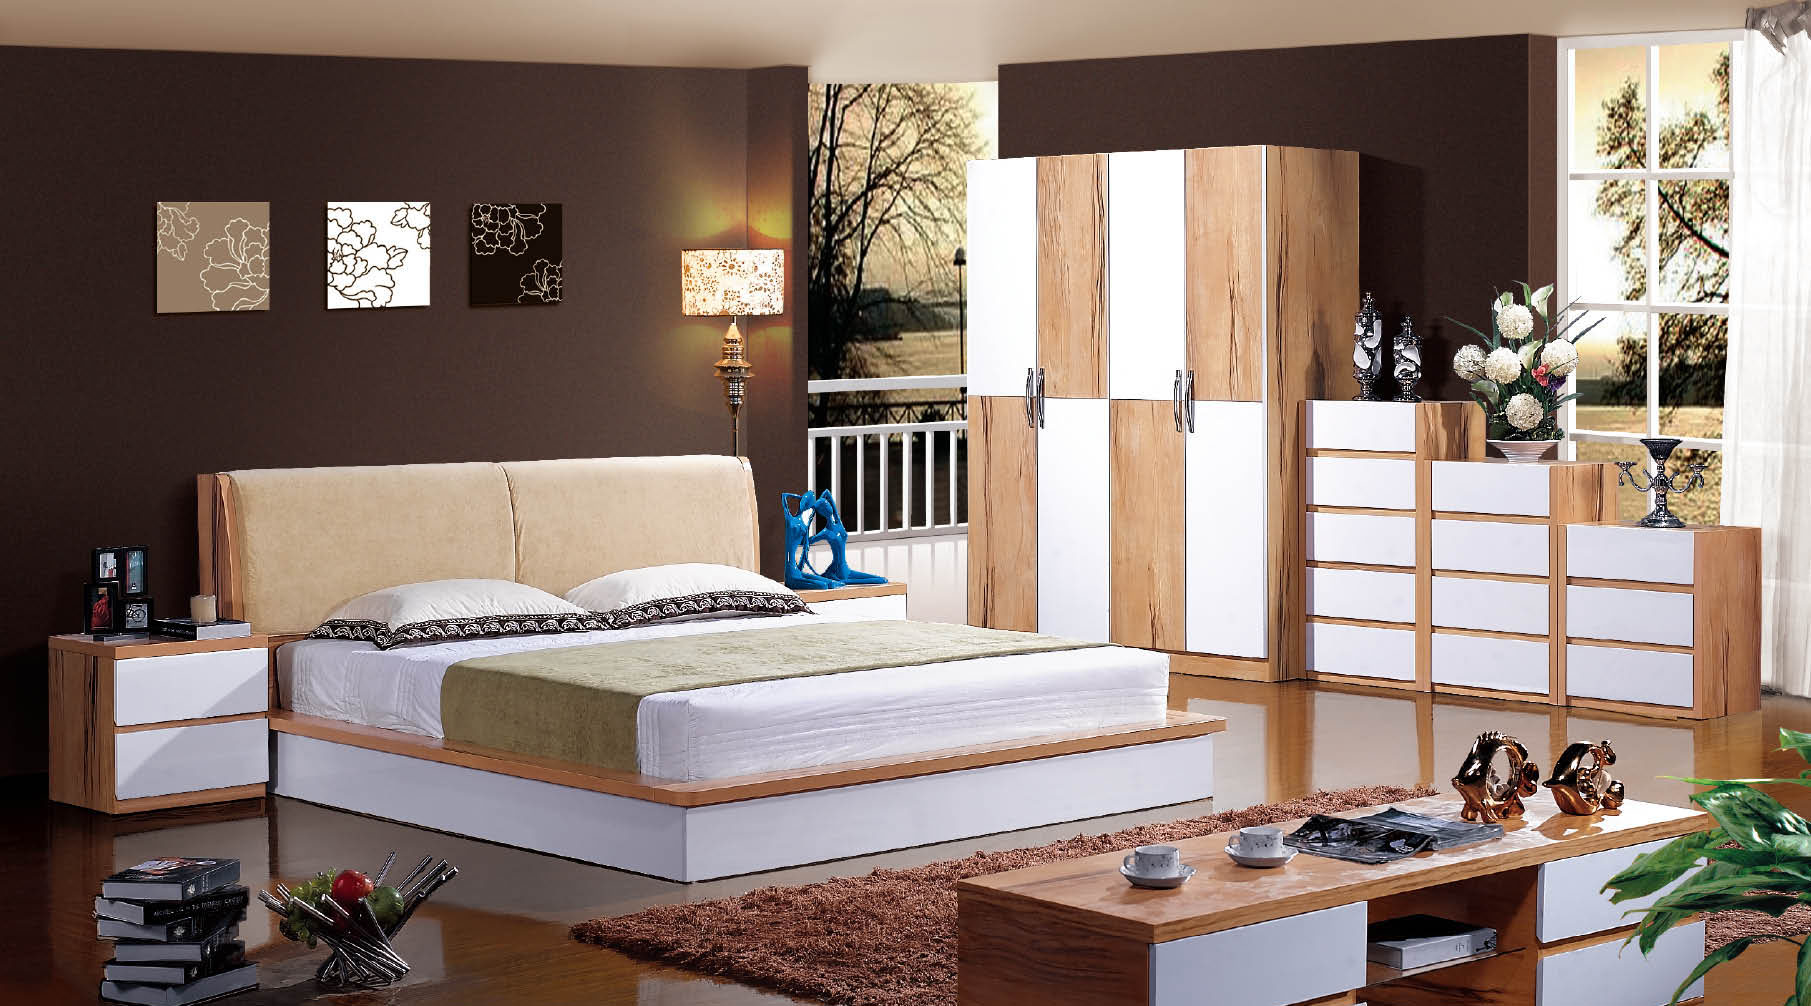 Luxury King Queen Size Full Set Leather Bed Frame Master Room 5 Star Hotel Modern Furniture Bedroom Set UL-CH006